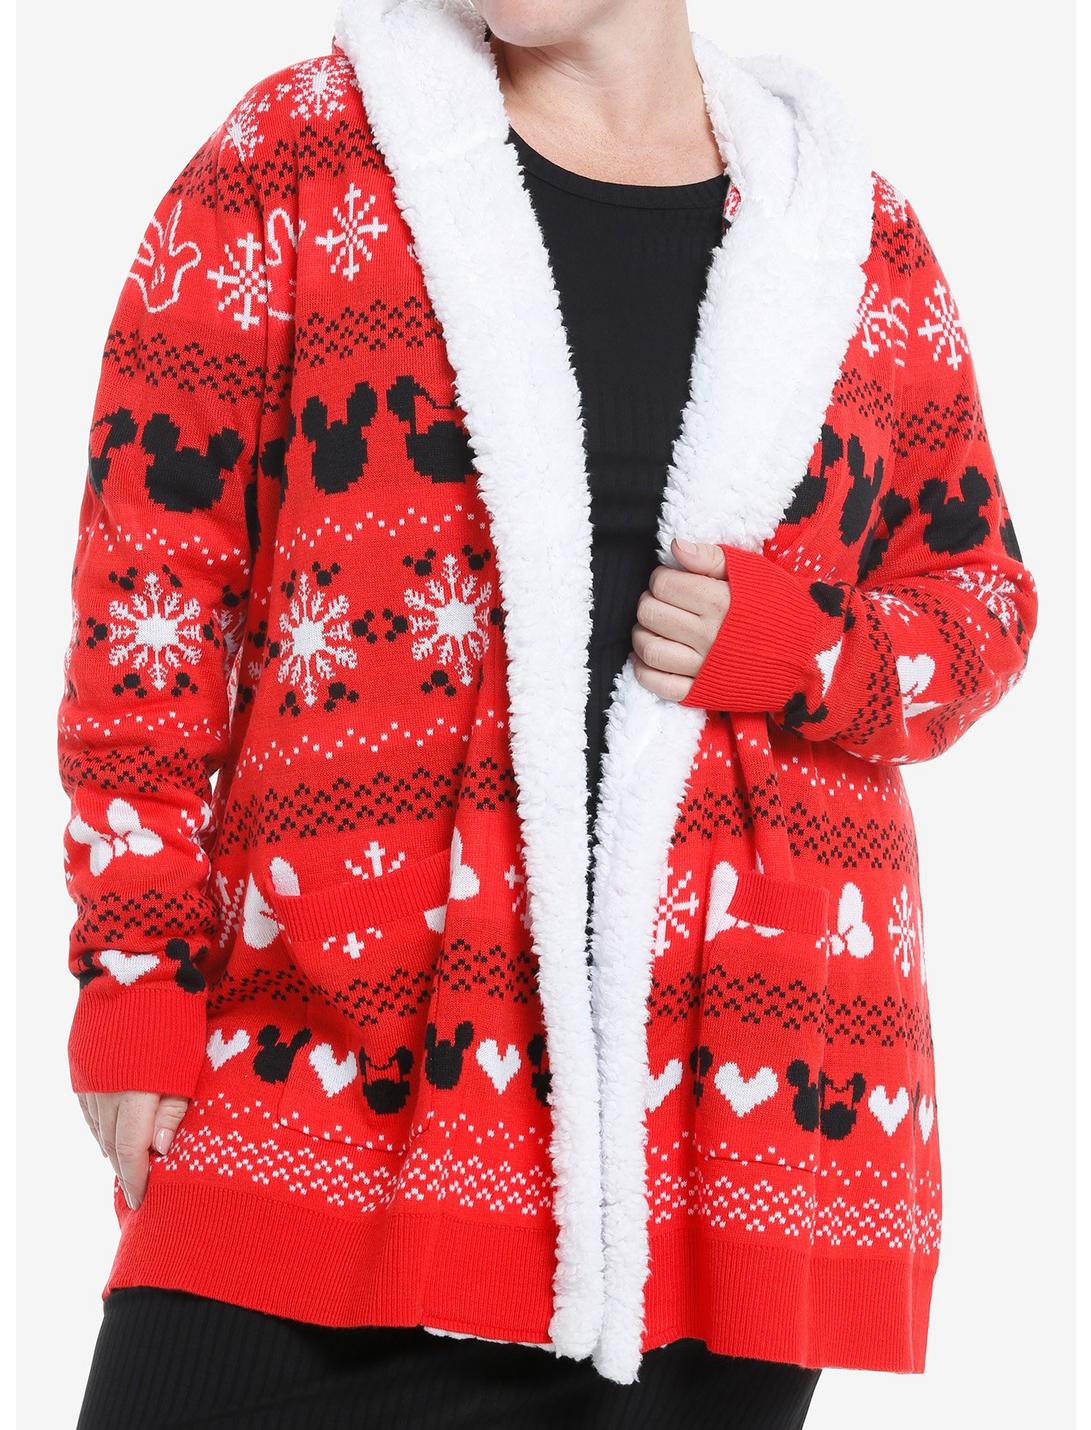 Disney Mickey Mouse & Minnie Mouse Fair Isle Sherpa Girls Open Cardigan Plus Size, MULTI, hi-res